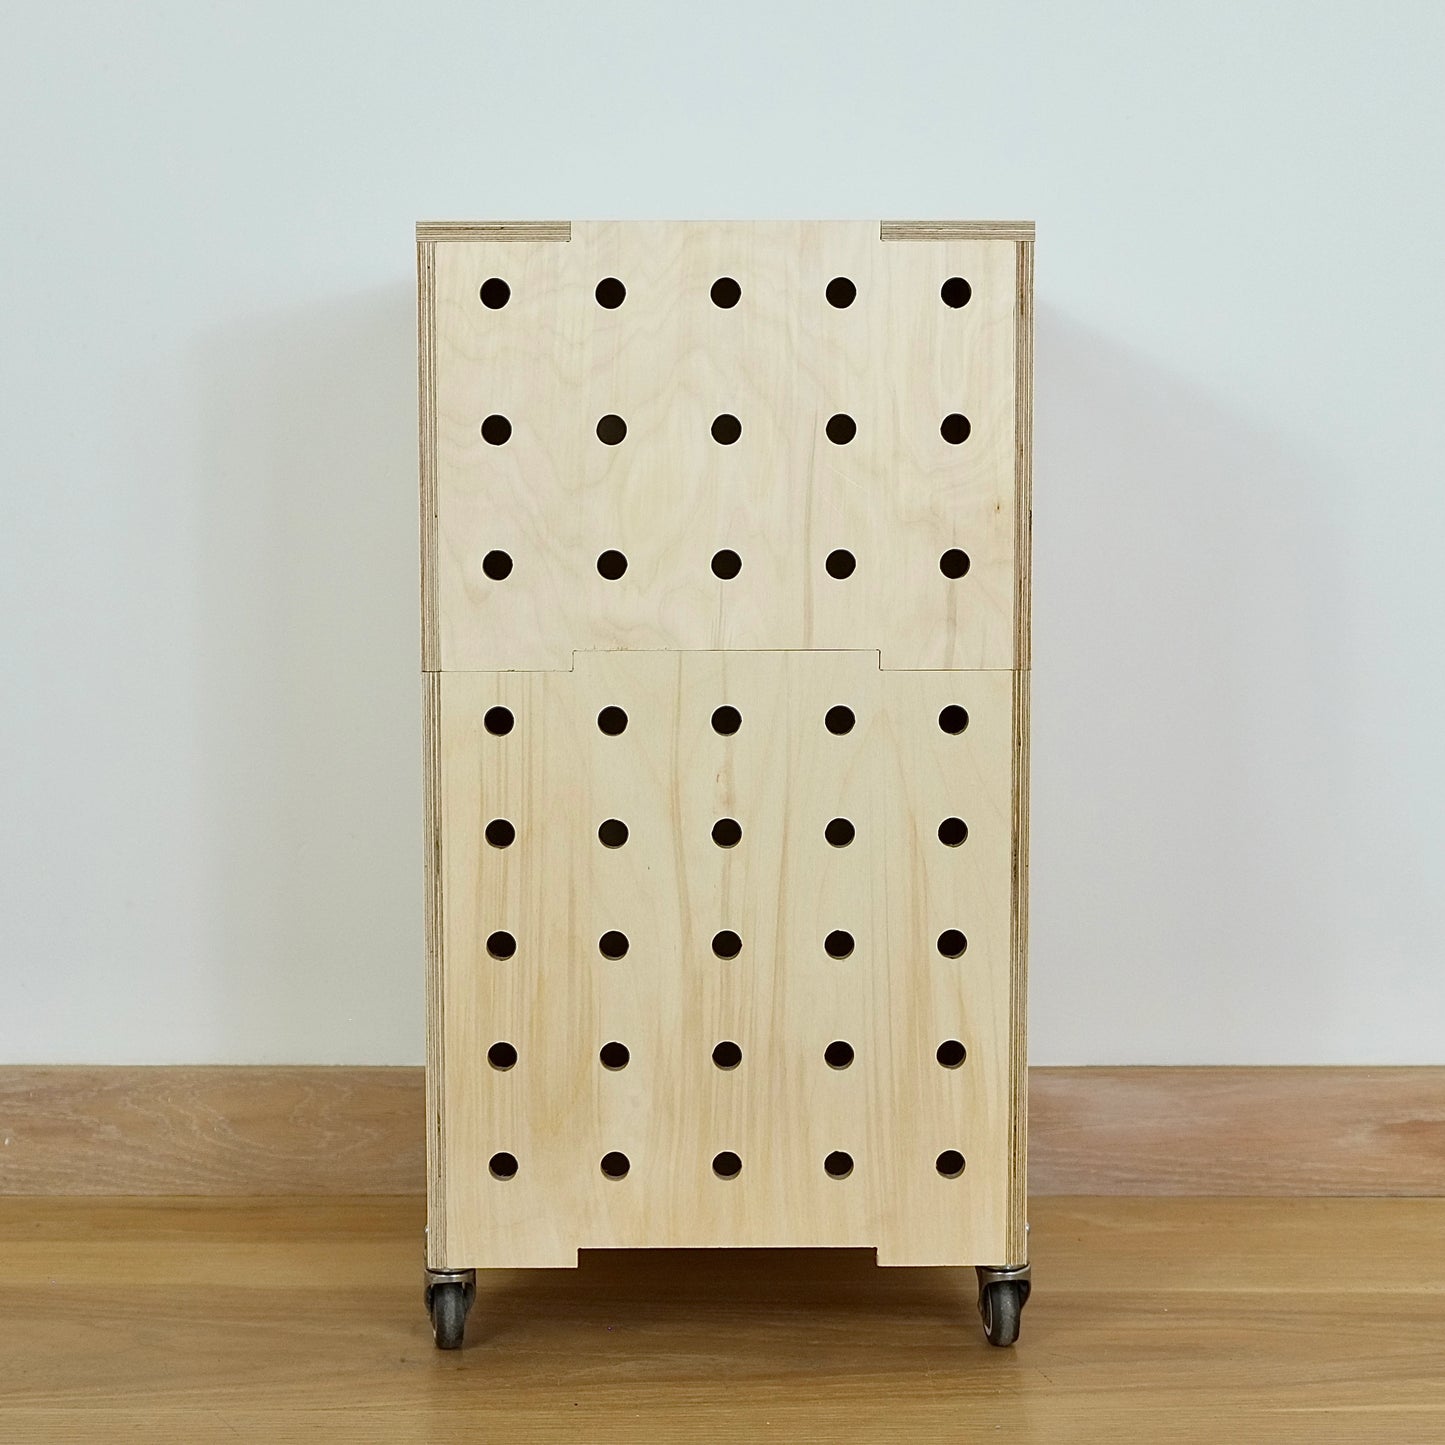 Modern plywood set of two stacking crates with 5 rows of vertical holes, castors & lid sitting on a wood floor against a white wall.